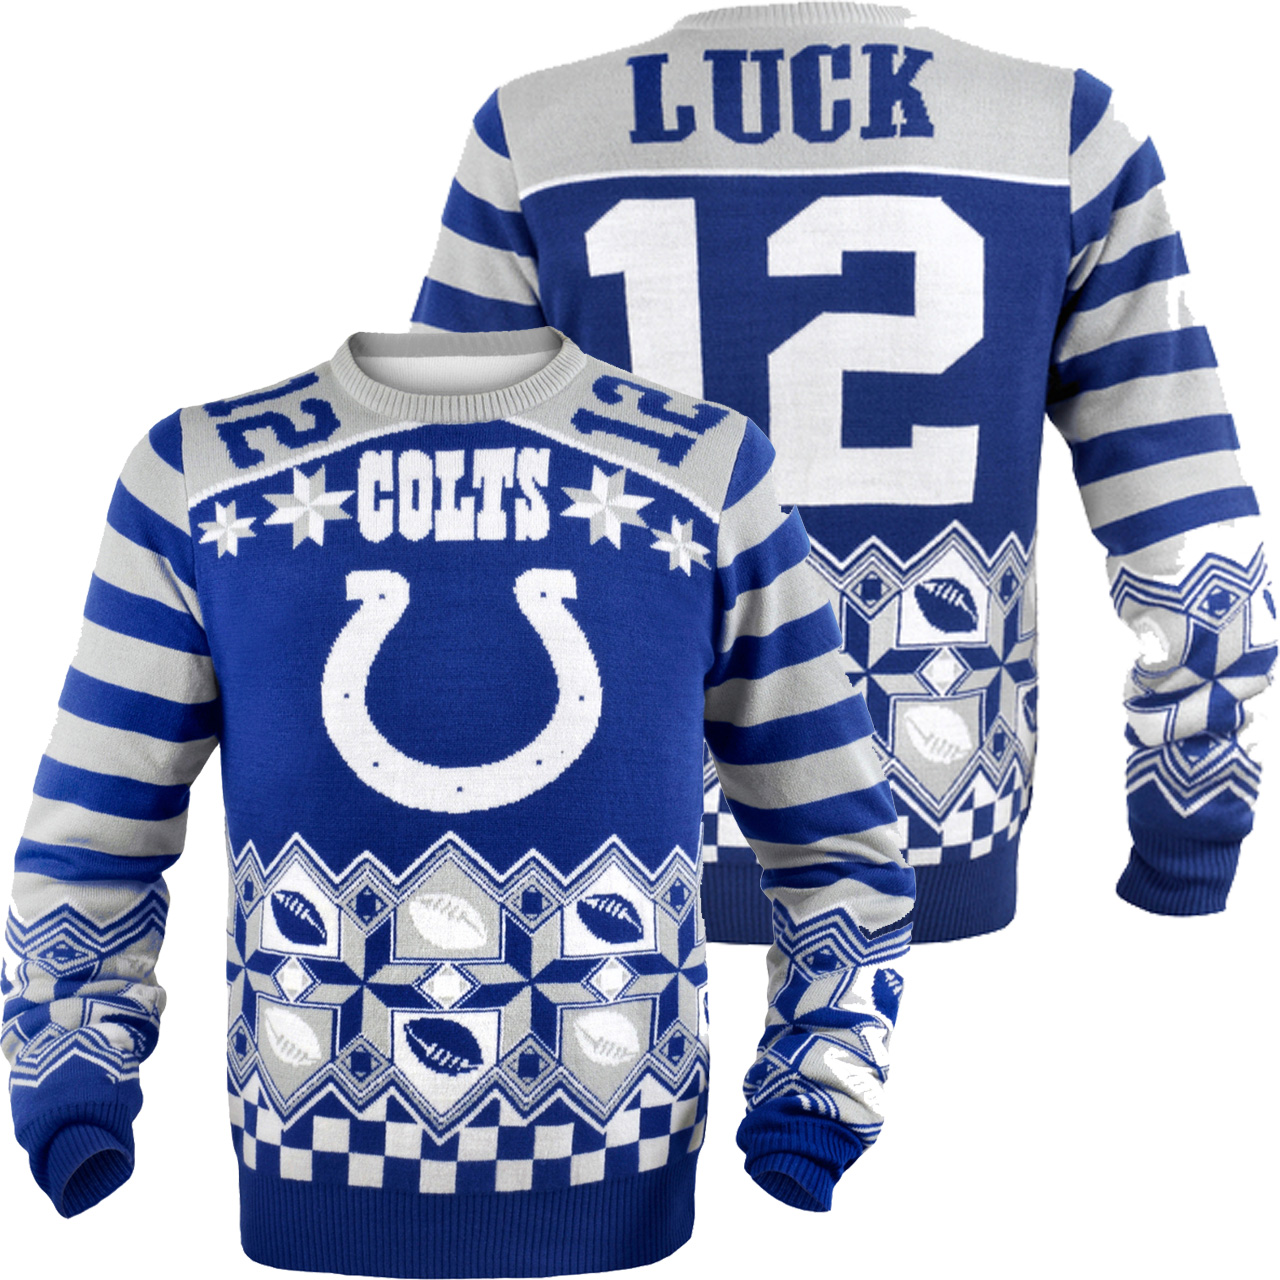 Andrew Luck Indianapolis Colts NFL Player Ugly Sweater